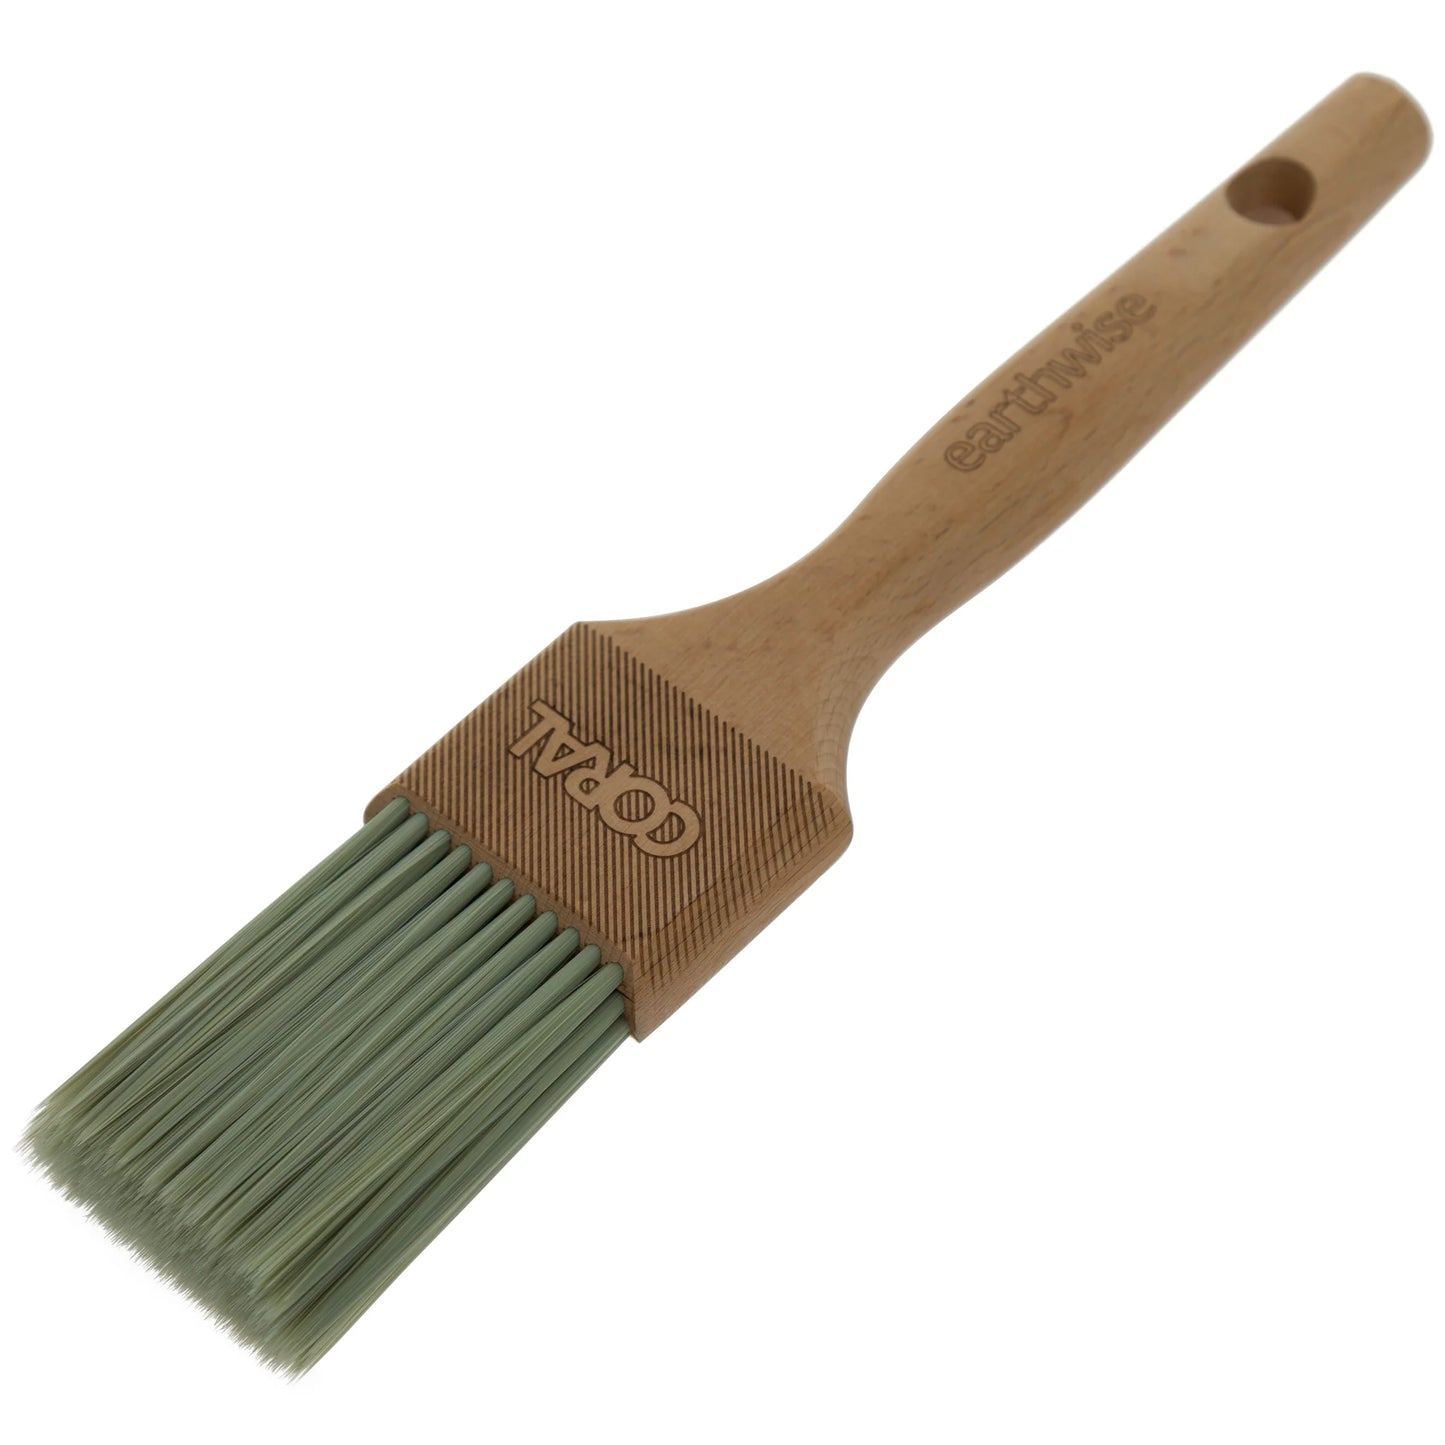 Earthwise 2" Paint Brush by Coral